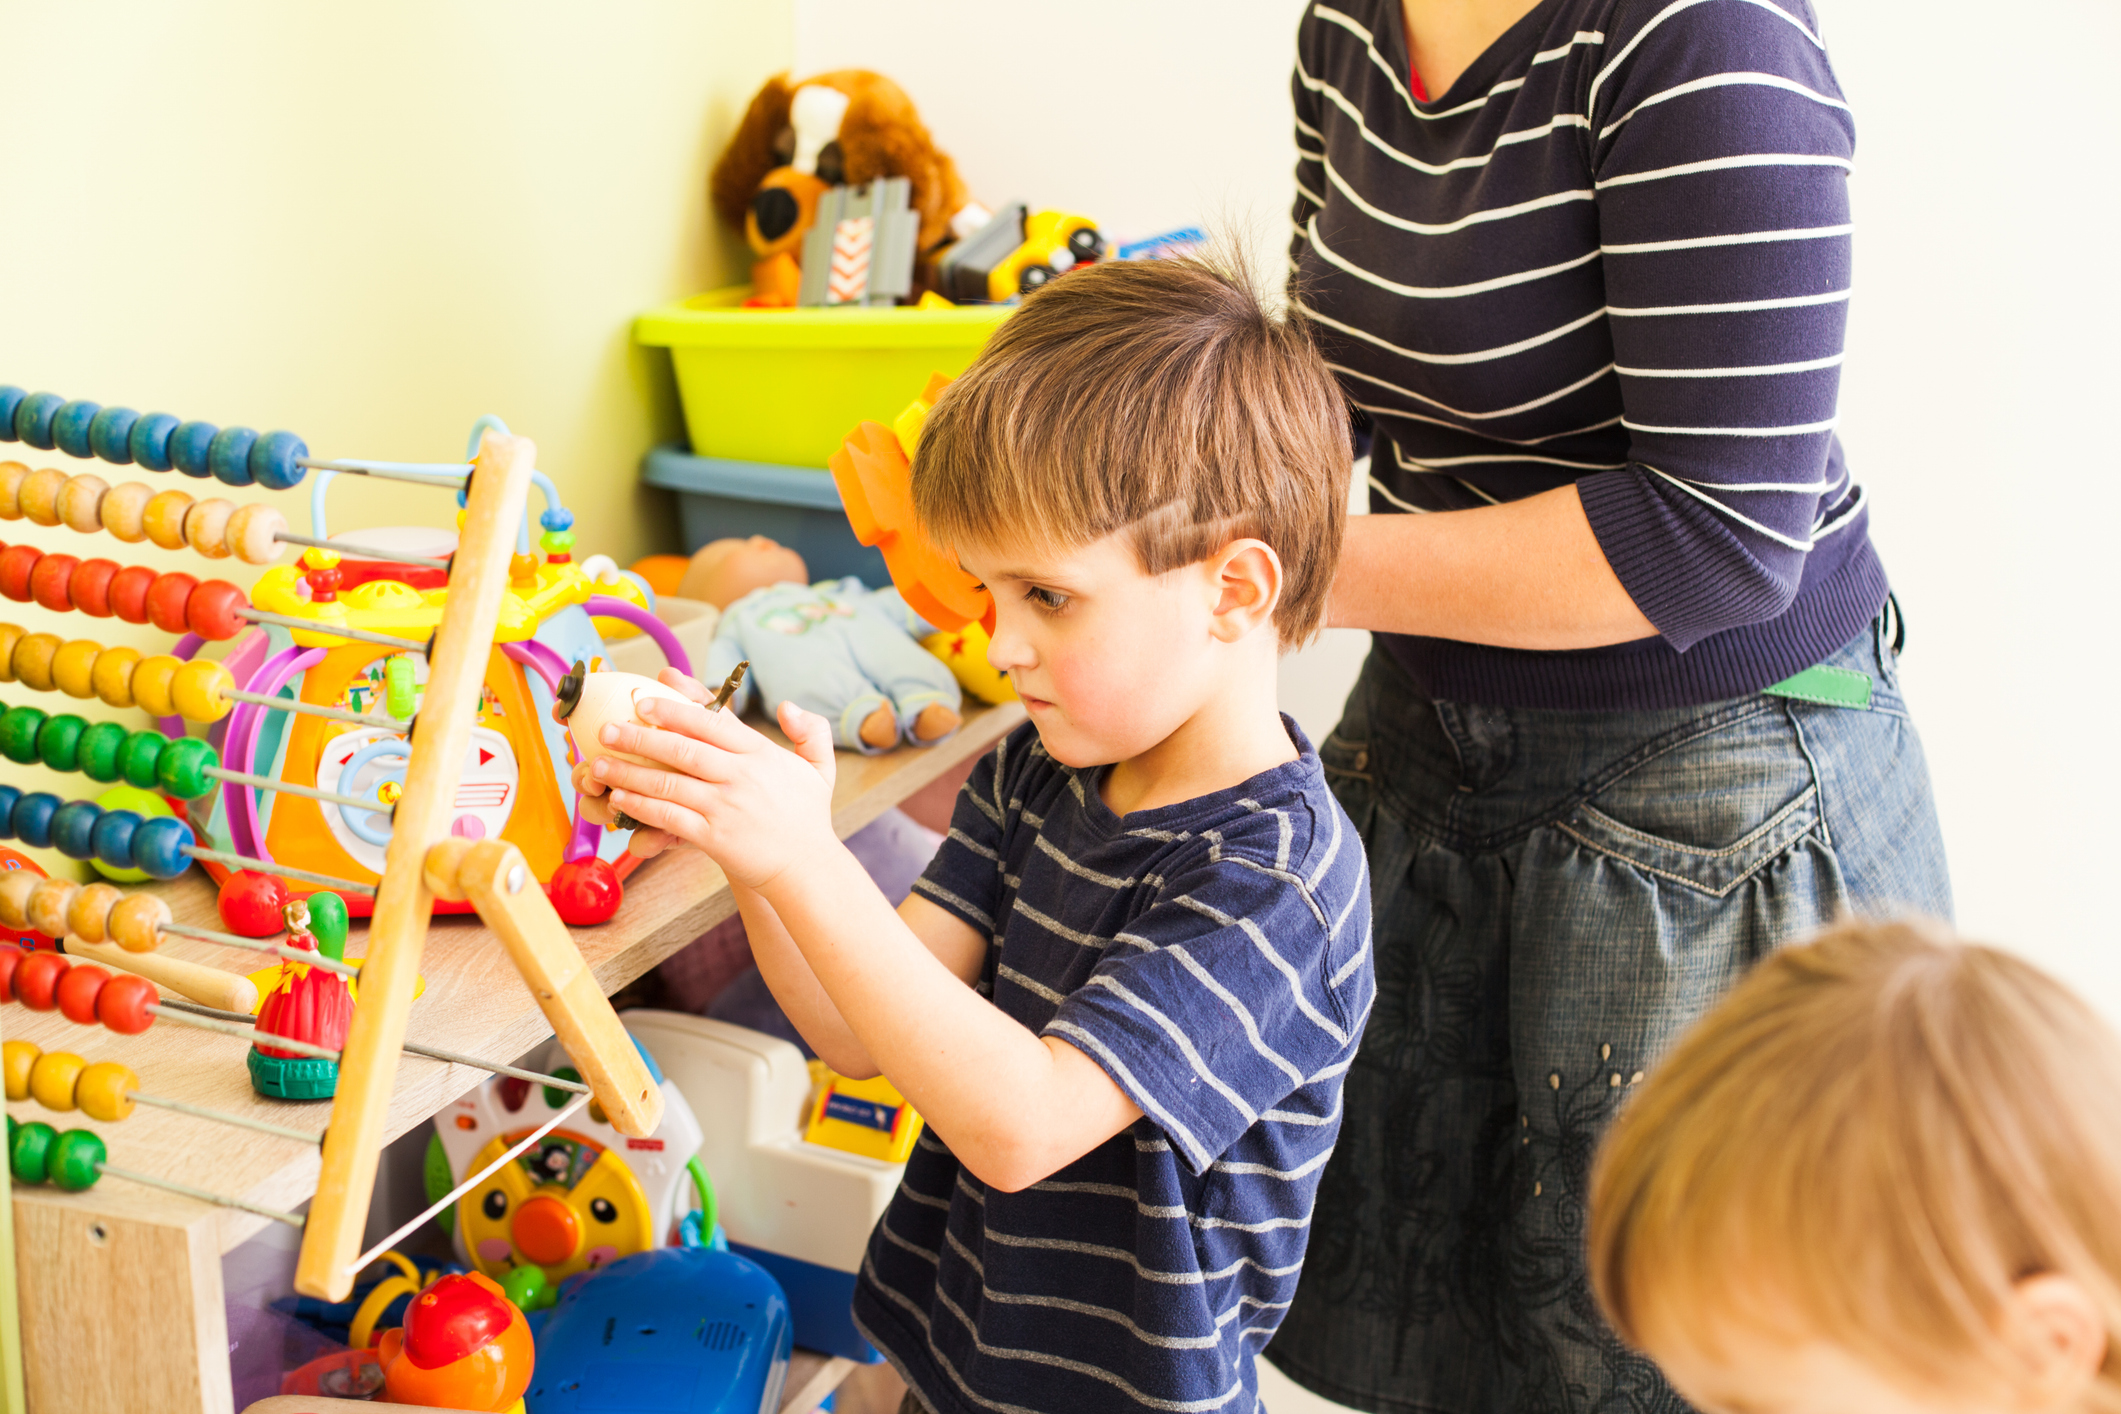 A young white boy with blond hair shaved in a lightning bolt design focuses intently on one toy in front of a shelf full of toys while a white woman in a striped blue shirt and black denim skirt tries to talk to him.